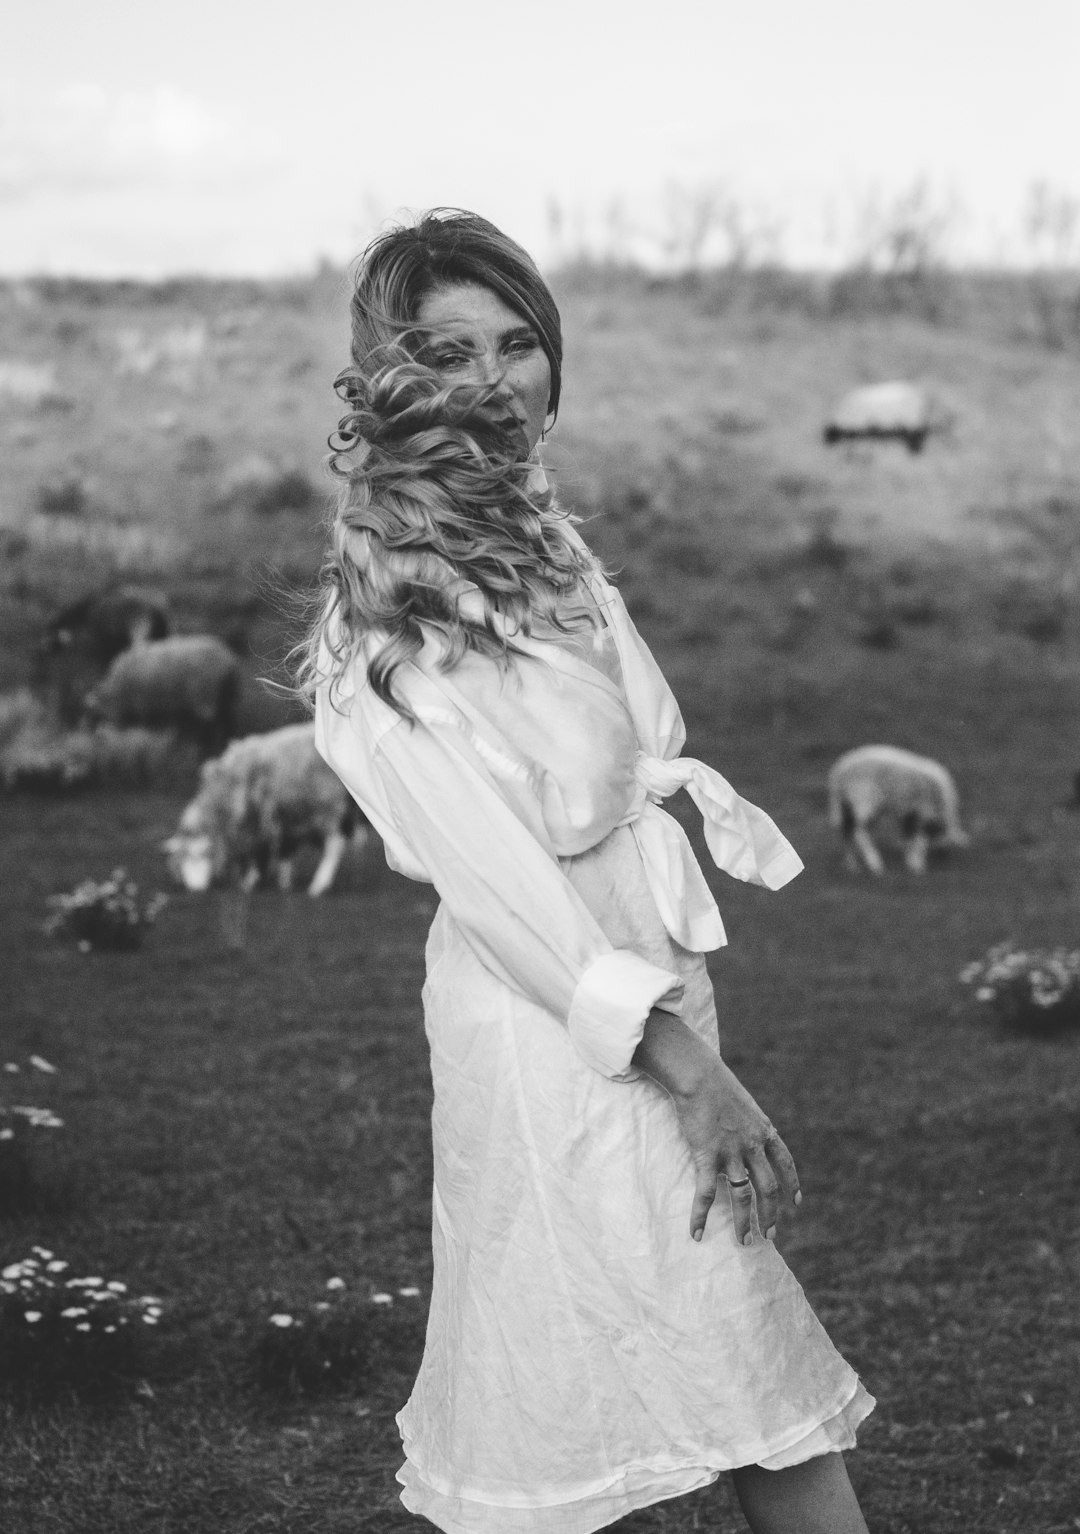 grayscale photo of woman in white dress standing on grass field